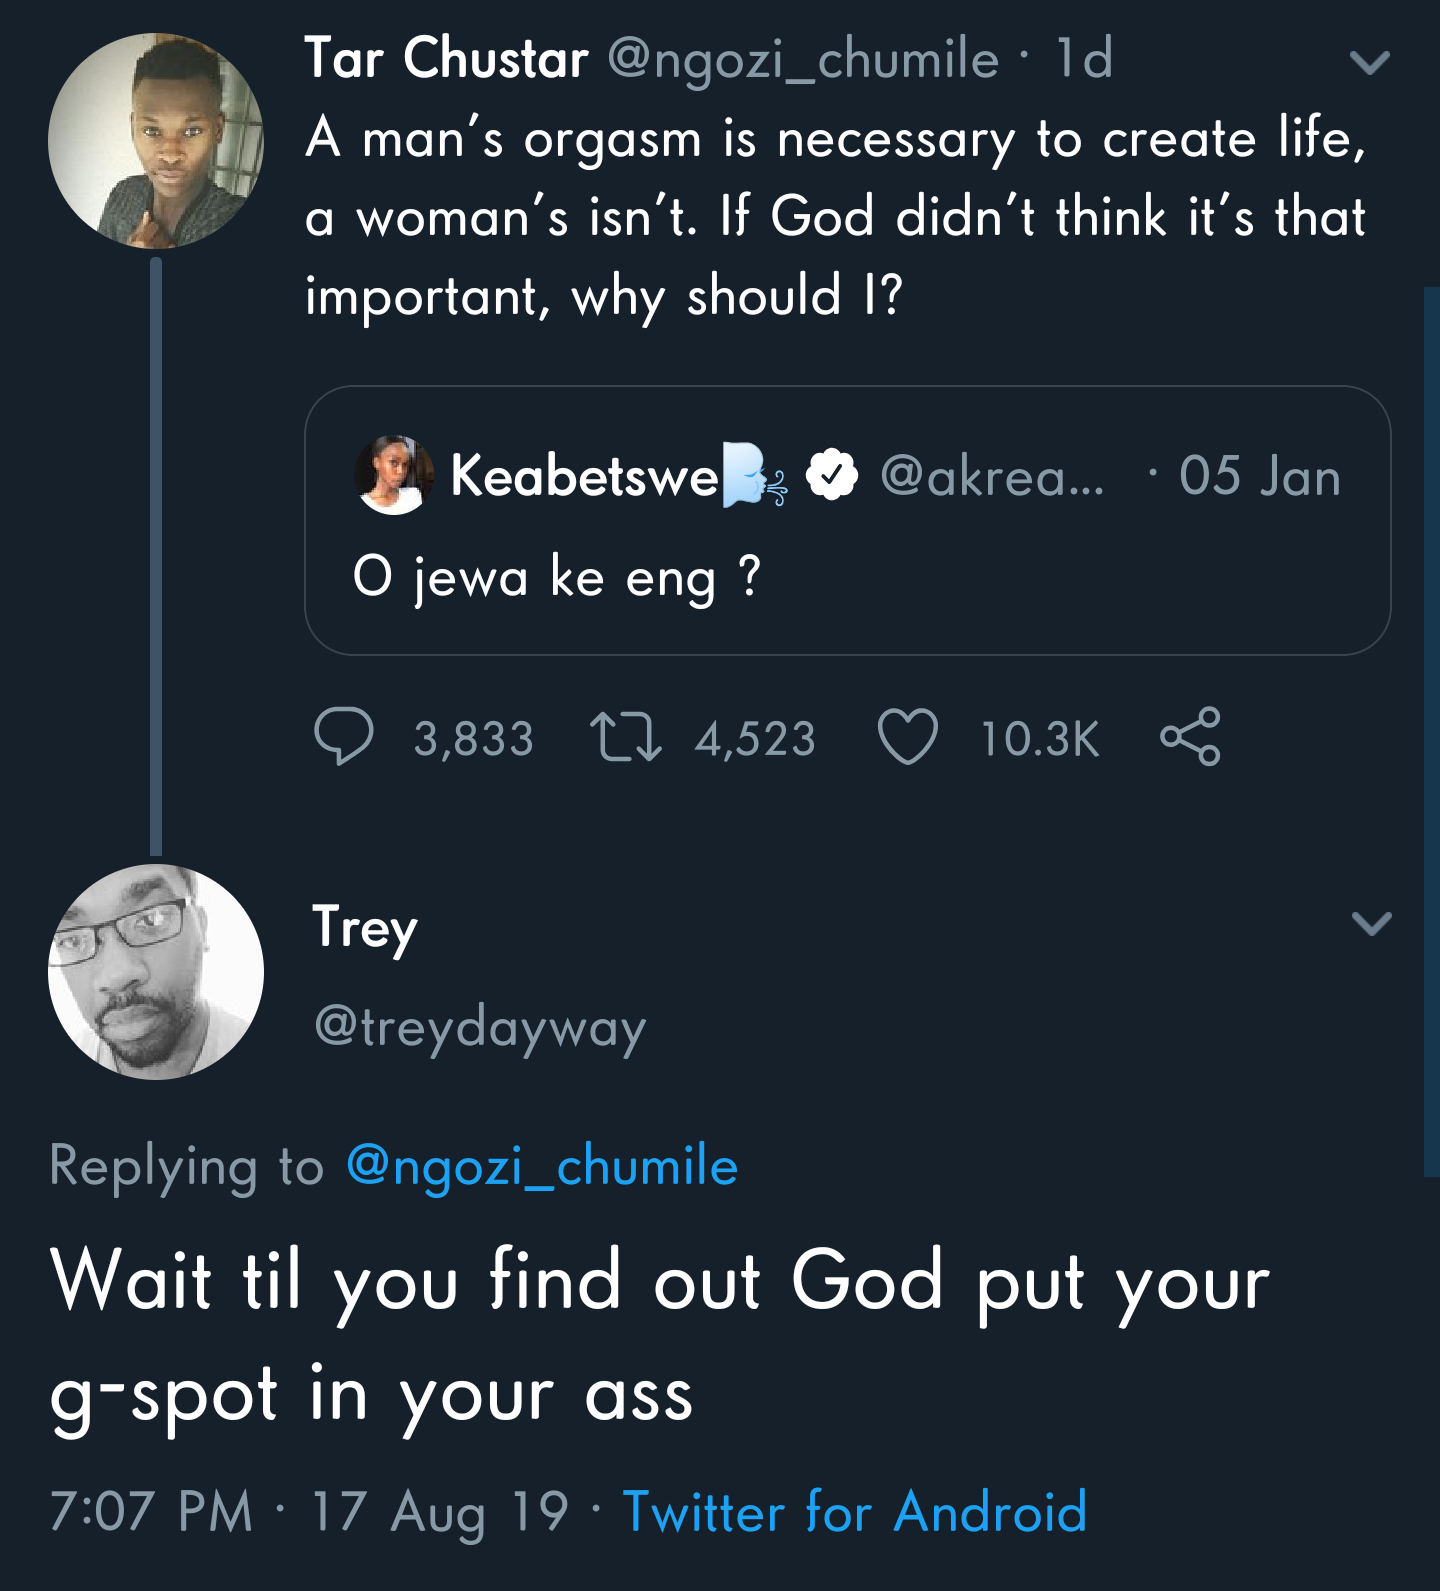 Tar Chustar 1d A man's orgasm is necessary to create life, a woman's isn't. If God didn't think it's that important, why should I? Keabetswelu ... .05 Jan O jewa ke eng ? O 3,833 22 4,523 Trey Wait til you find out God put your gspot in your